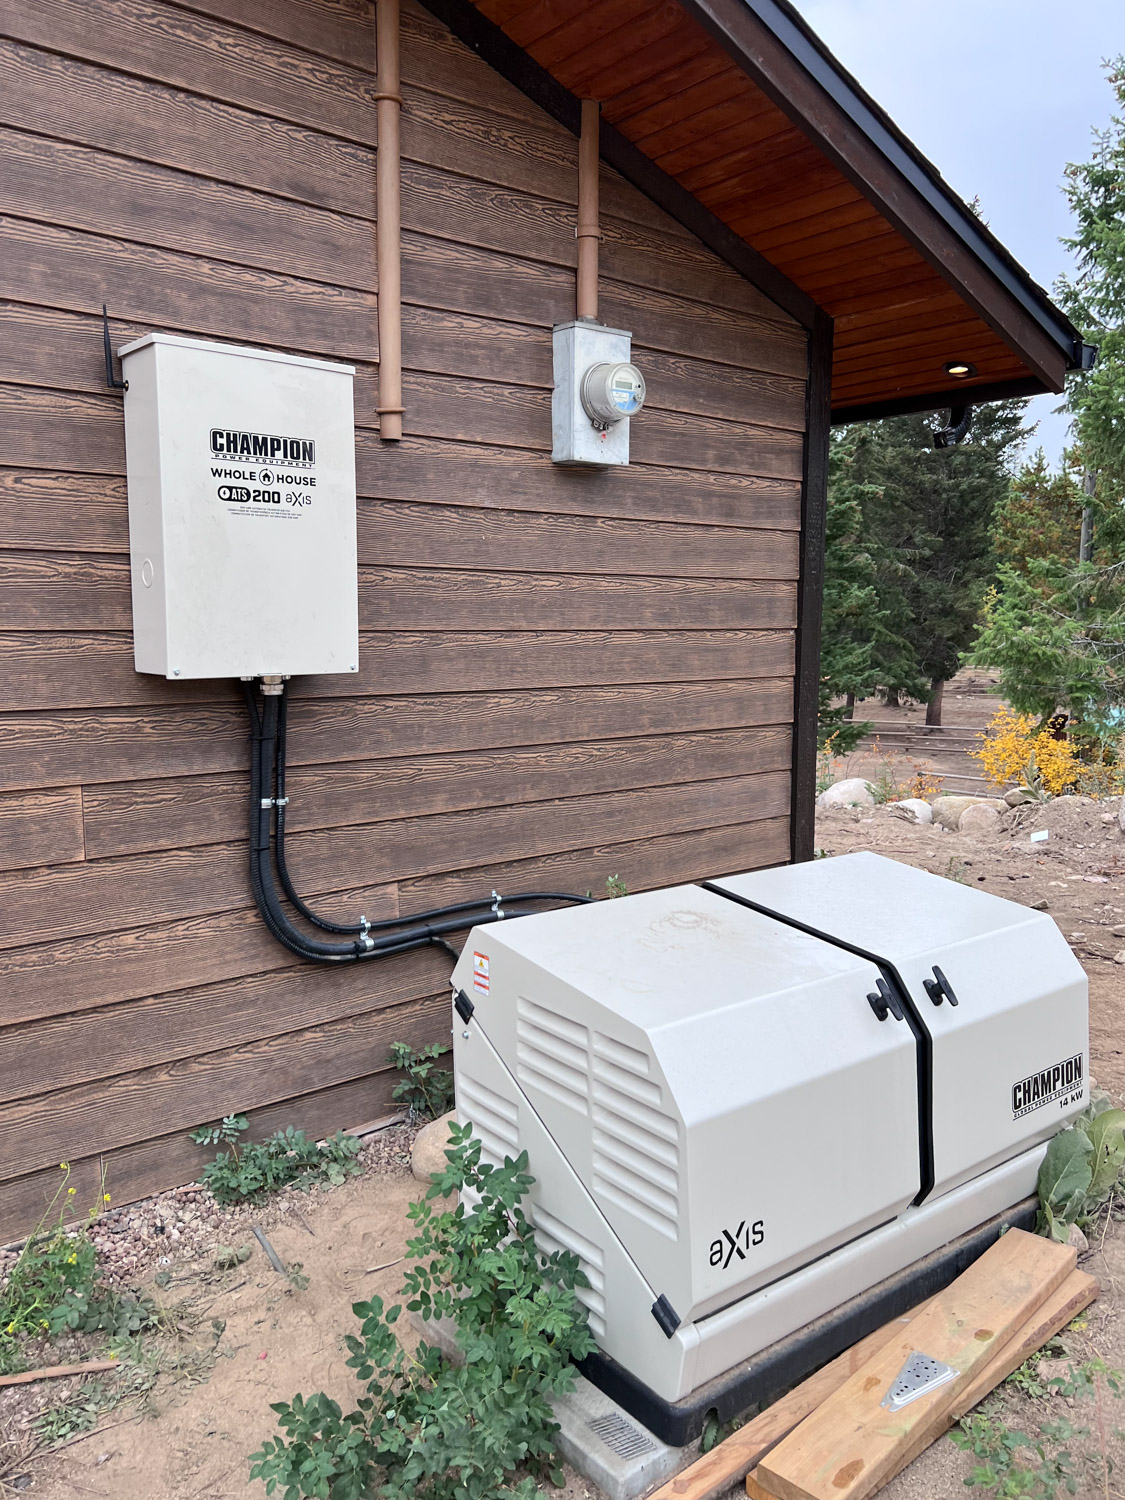 Champion generator on a commercial service job in the Thompson-Okanagan